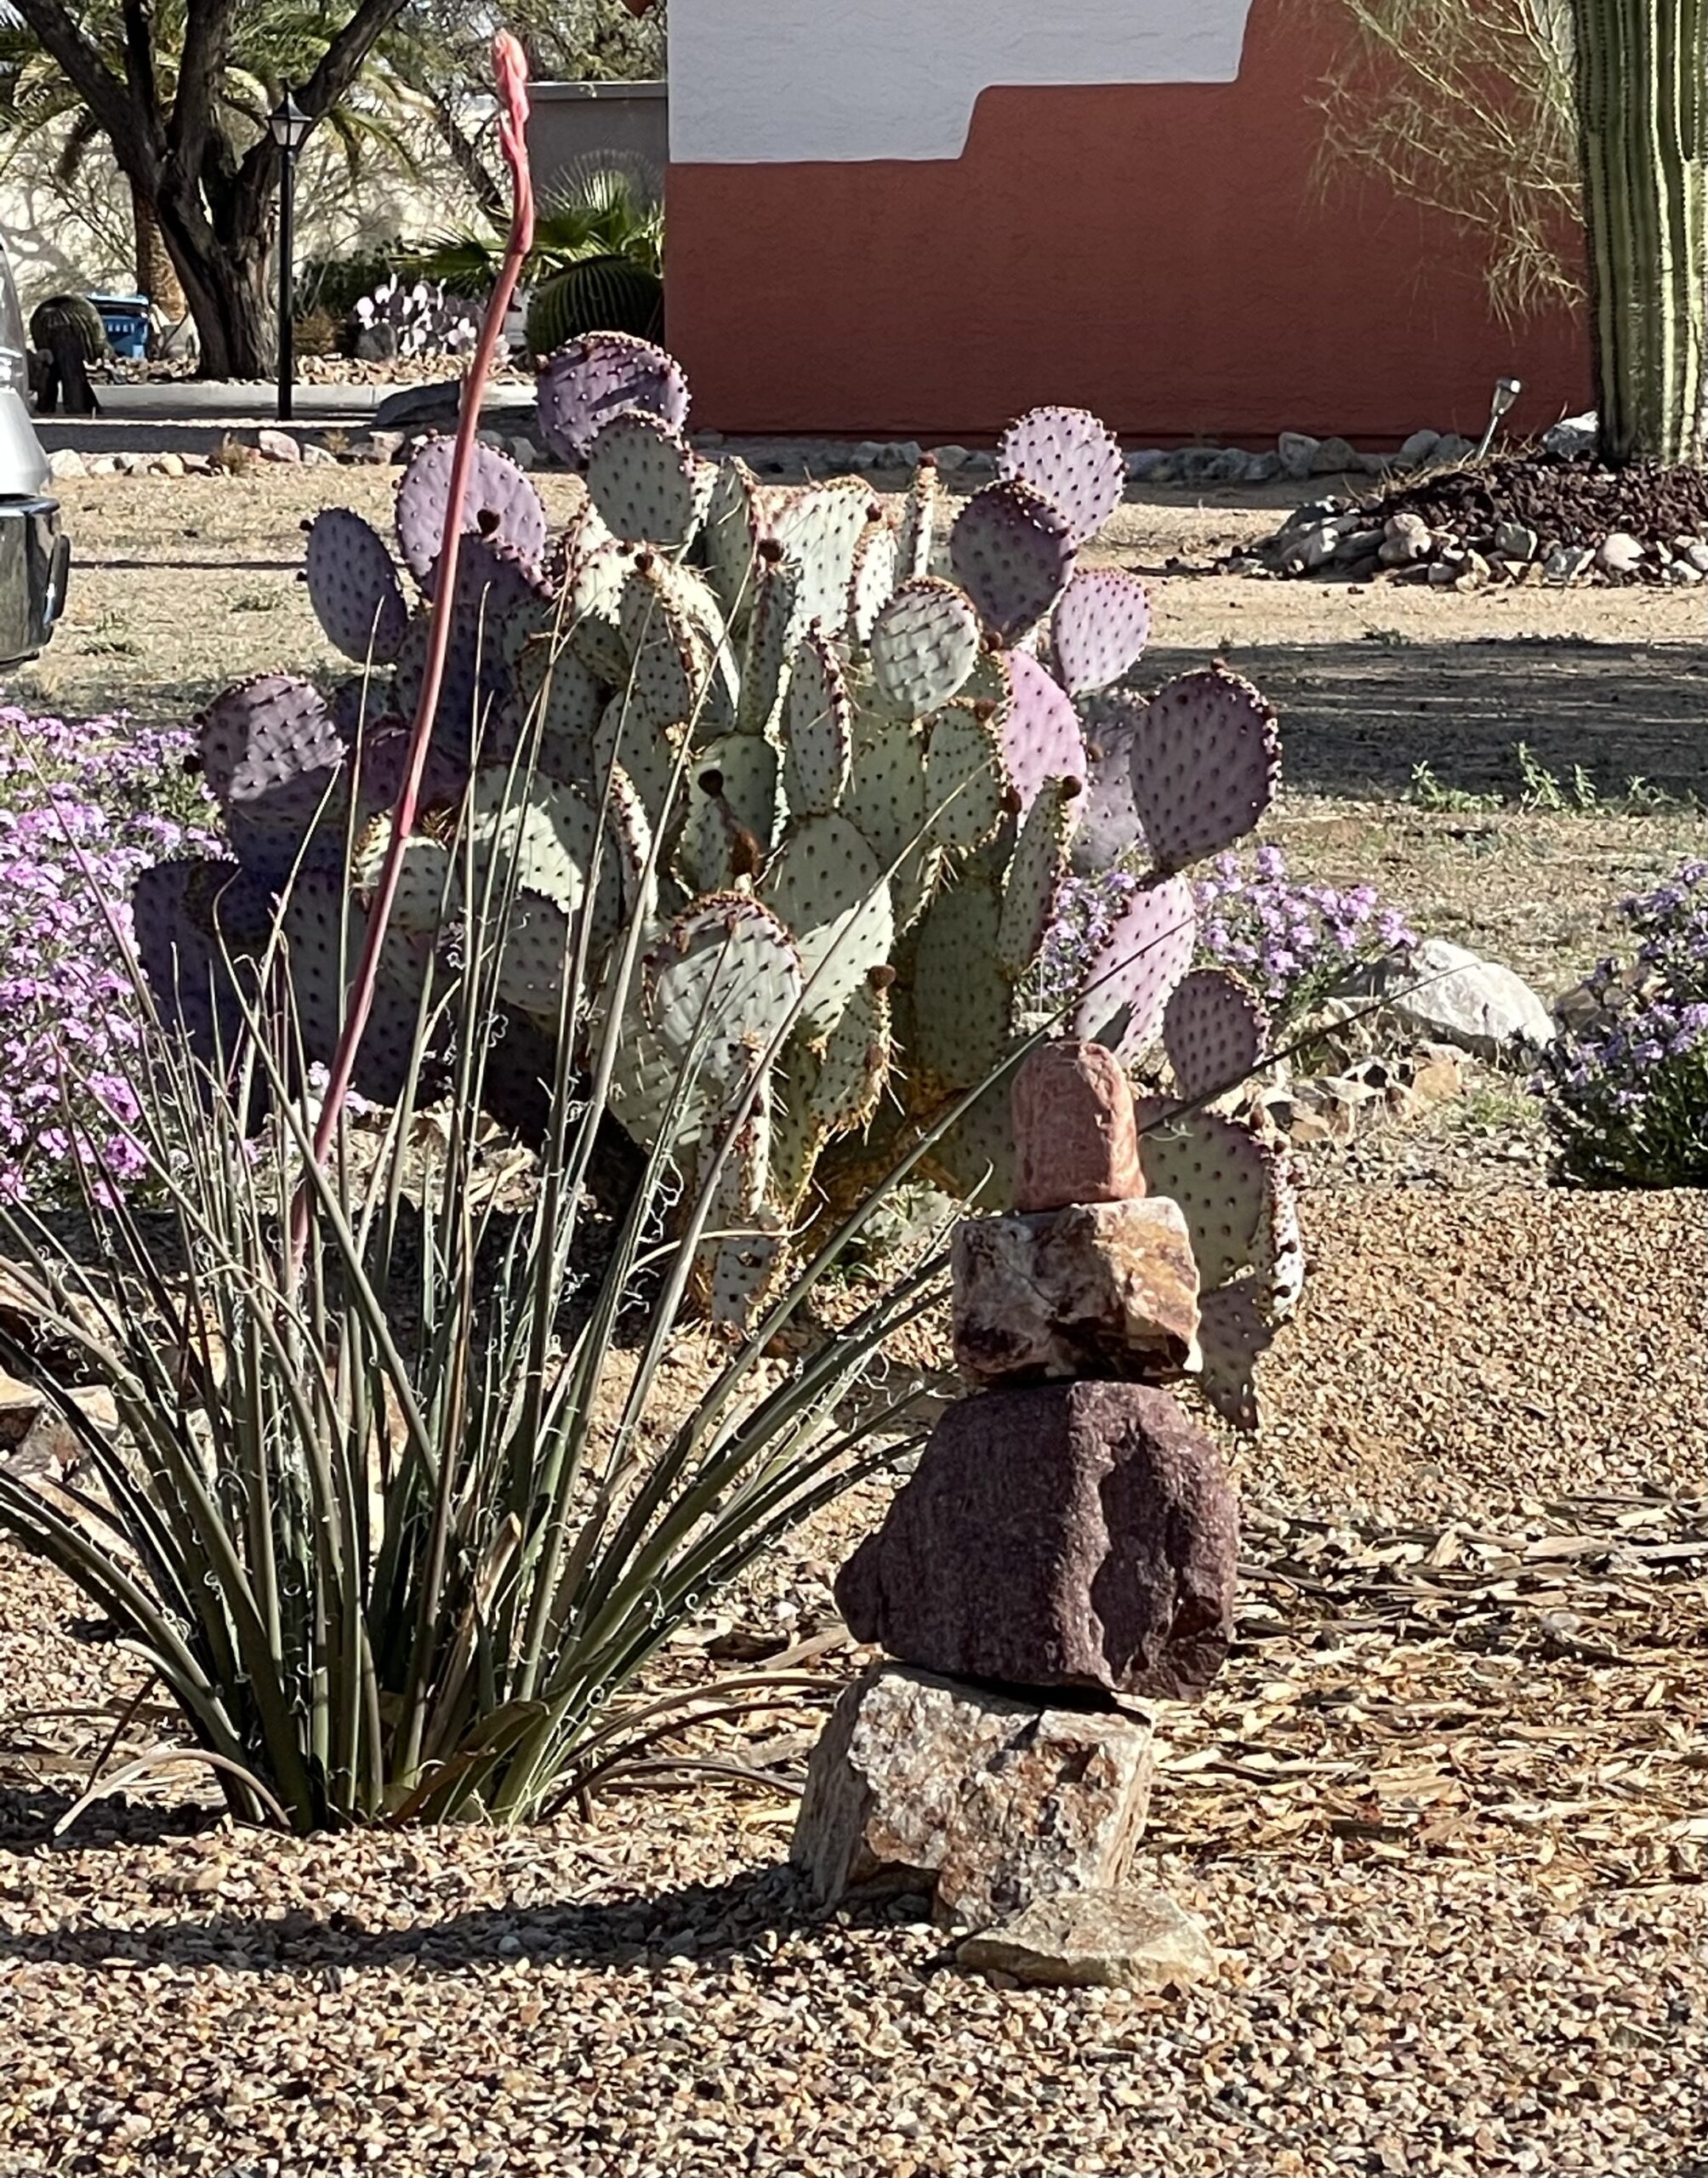 Purple prickly pear and red hesperaloe